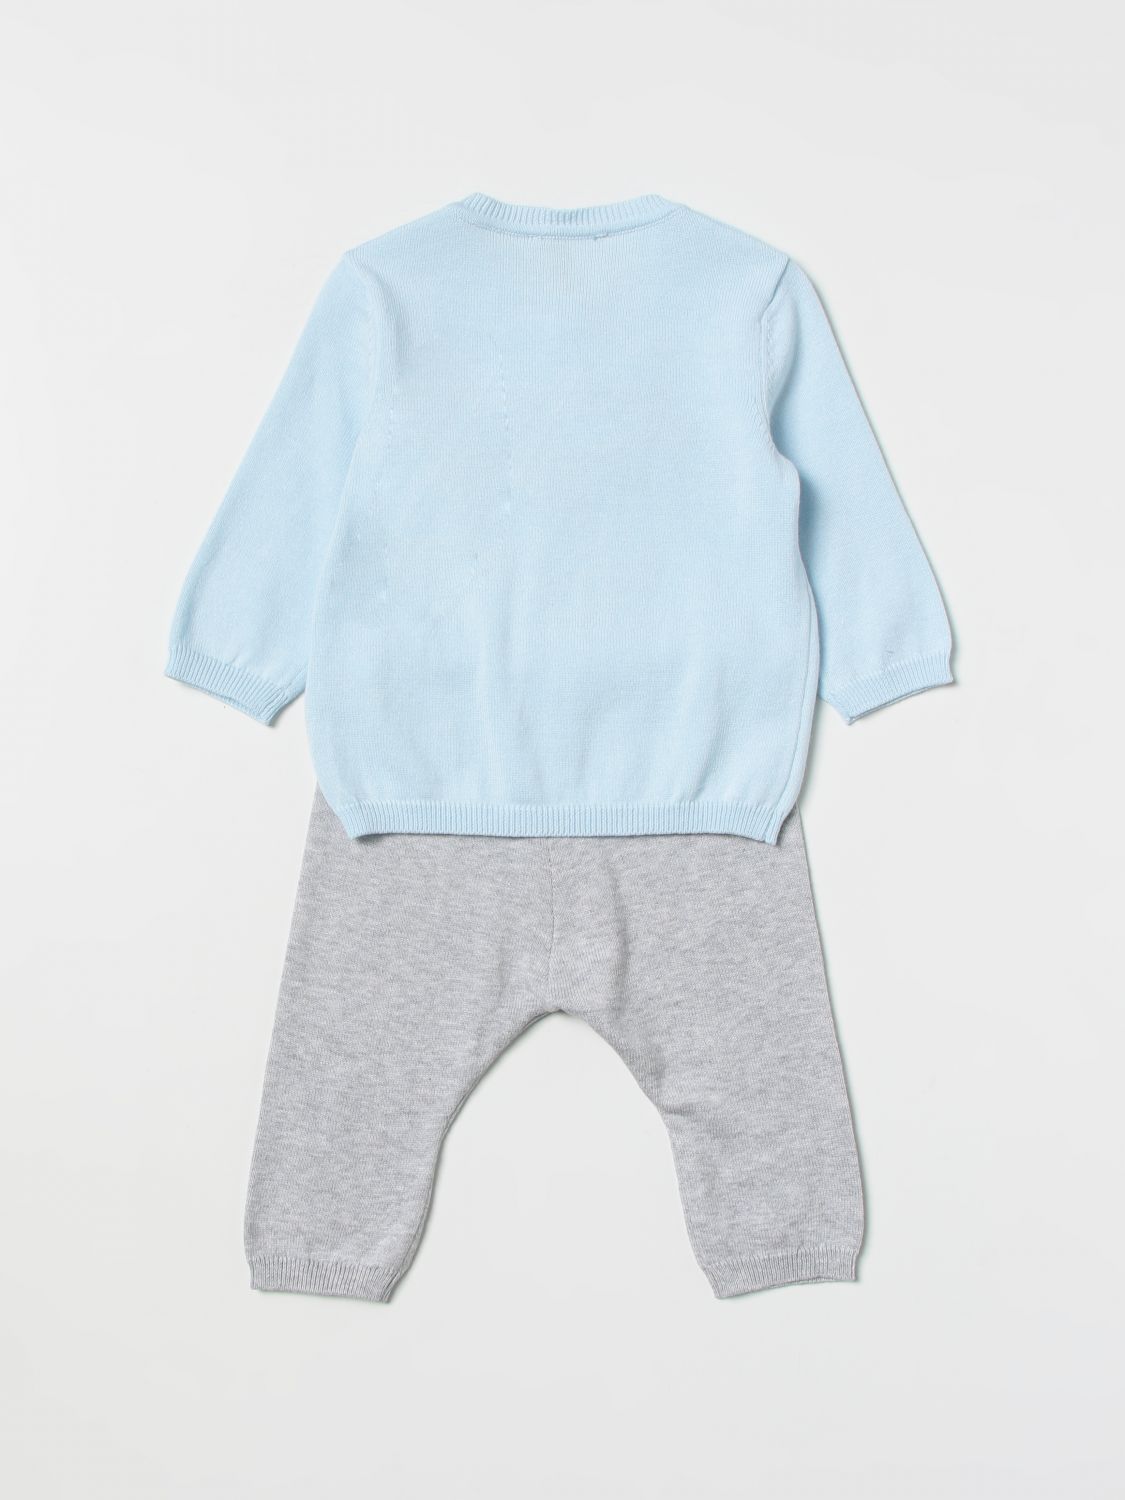 Kenzo Kid's Knitted Outfit - Color: Pale Blue - Kids Premium Clothing -